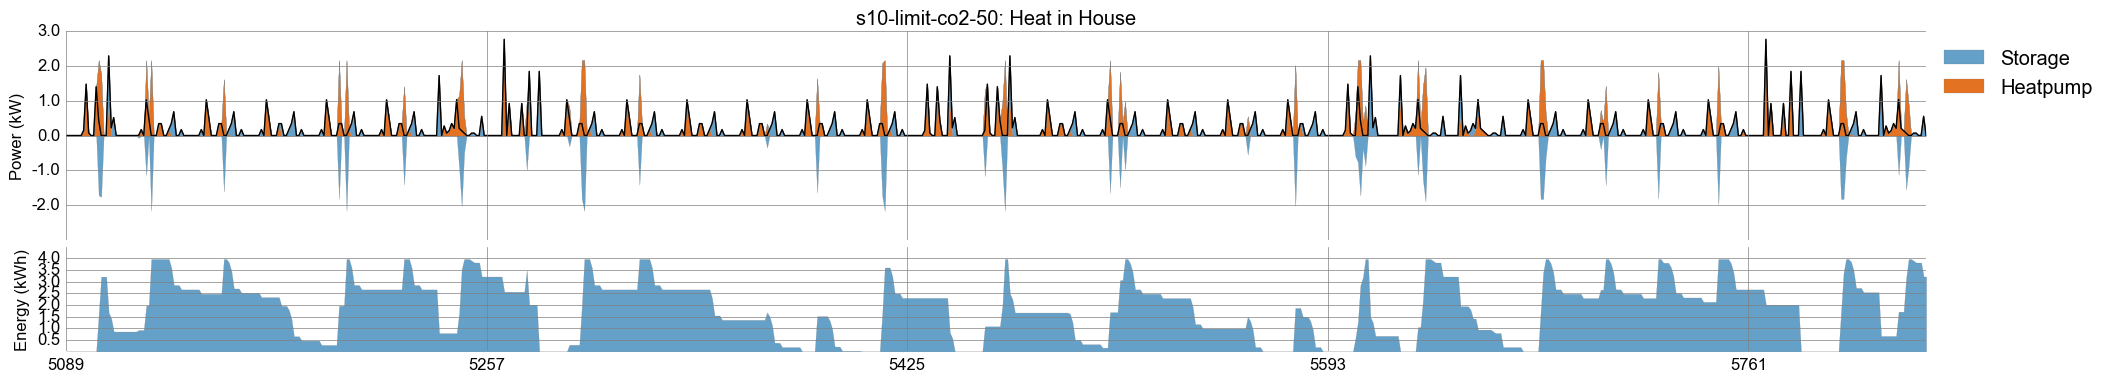 Timeseries plot of month August for heat generation in scenario s10: CO2 limit 50%